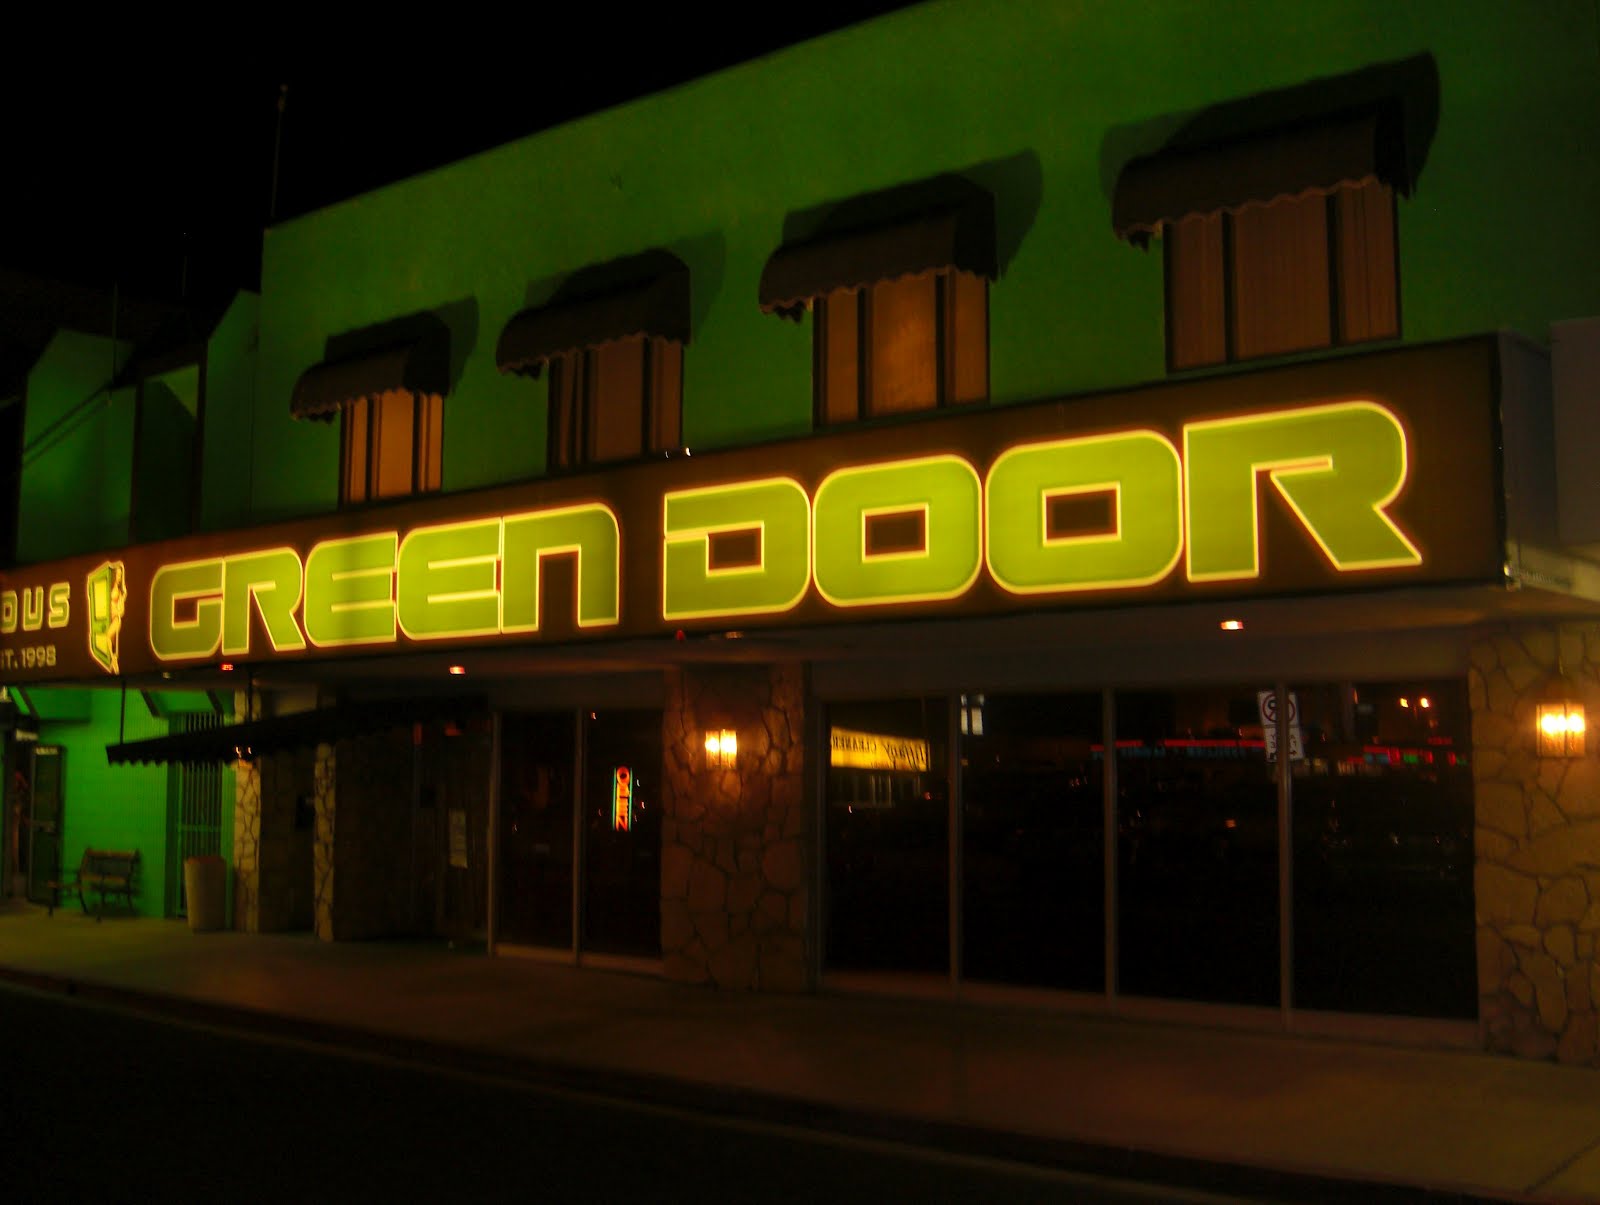 The TTABlog® Test Your TTAB Judge-Ability Is GREEN DOOR for Sex Club Services Confusingly Similar to THE GREEN DOOR for Restaurant Services? image pic